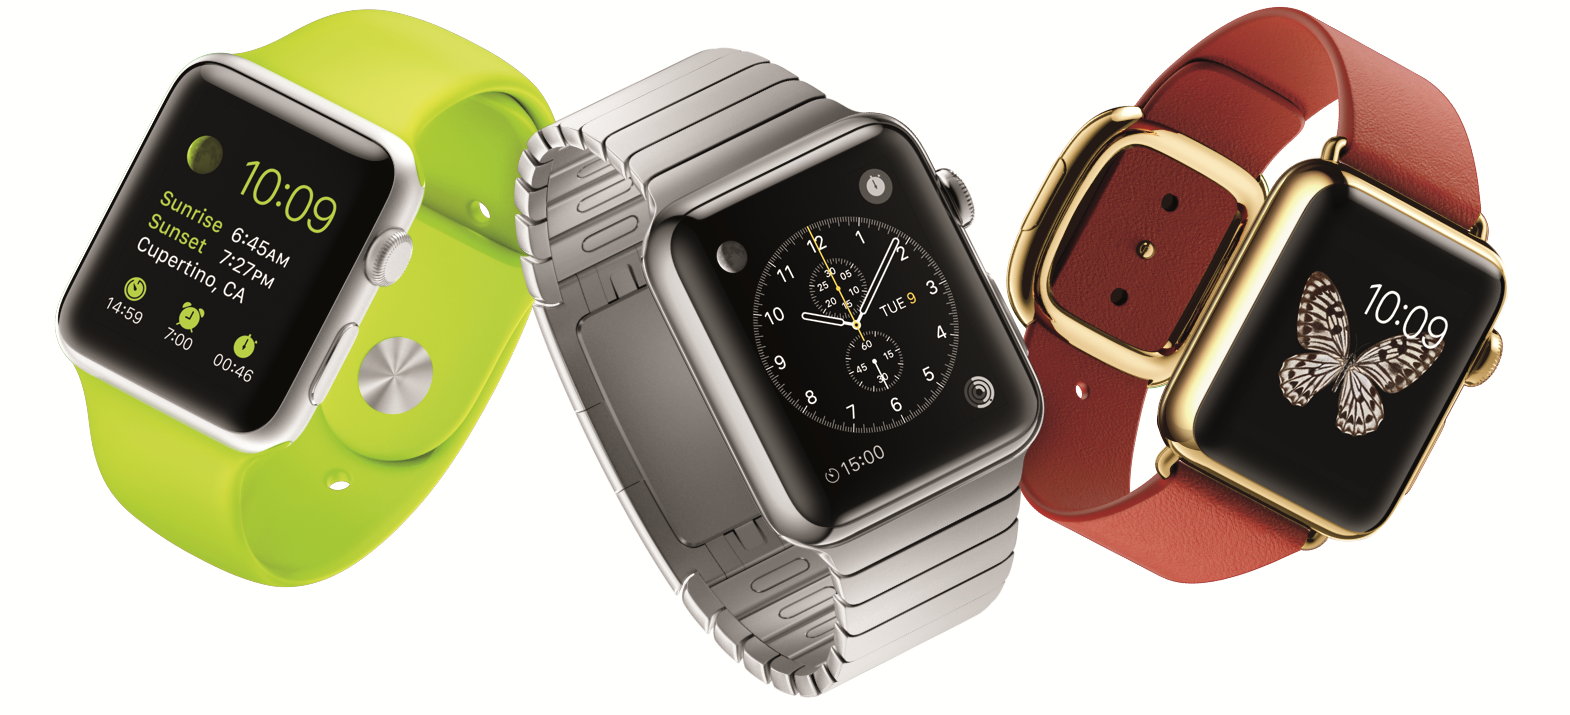 Apple to Account for Half of Smartwatches Sold in 2016